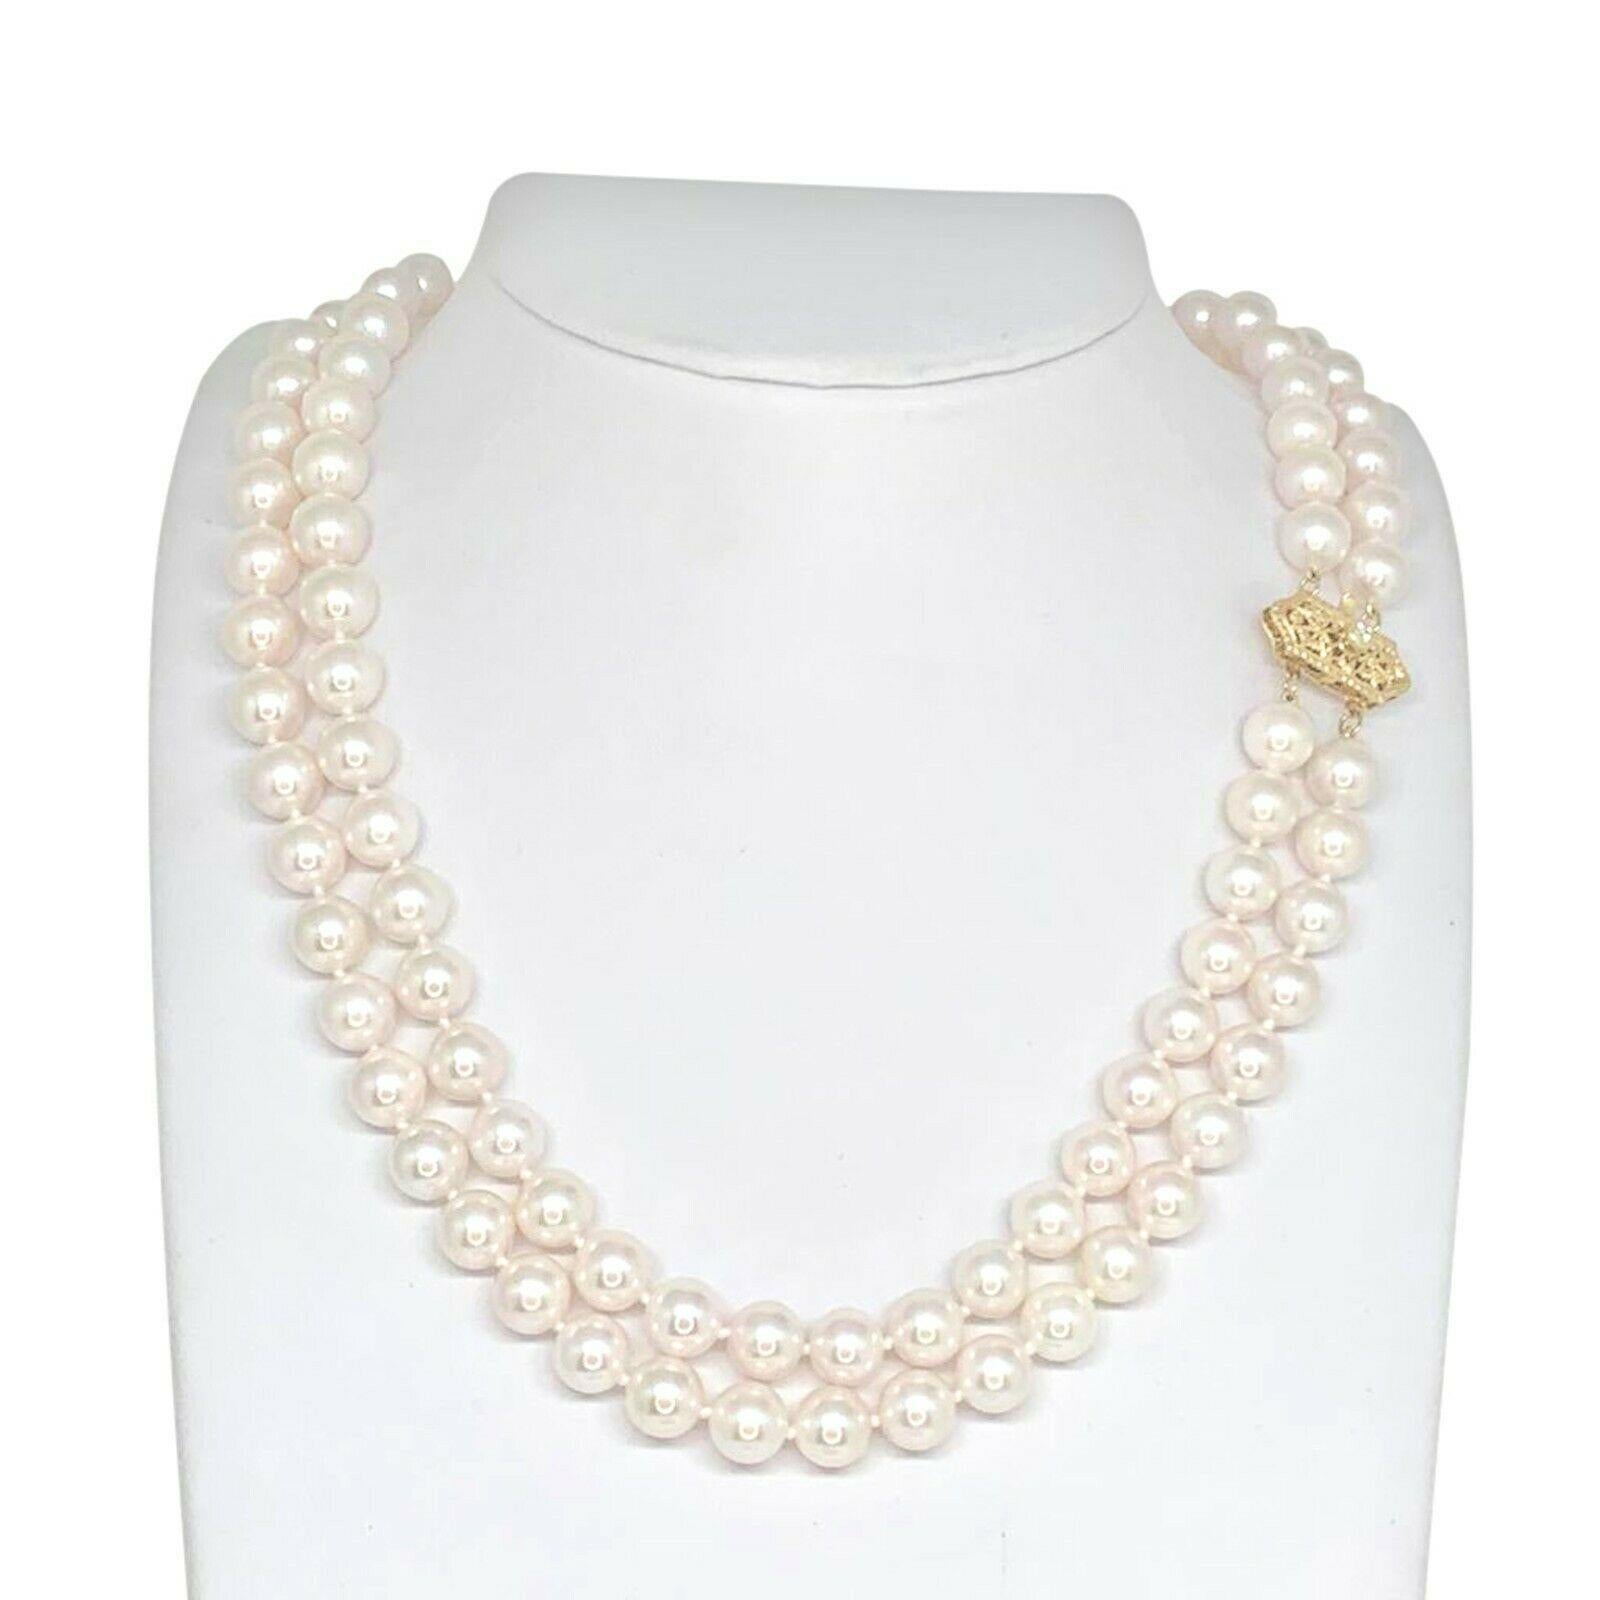 Fine Quality Akoya Pearl Diamond Necklace 8 mm 14k Gold 2-Strand Certified $9,750 010933

This is a Unique Custom Made Glamorous Piece of Jewelry!

Nothing says, “I Love you” more than Diamonds and Pearls!

This Akoya pearl necklace has been